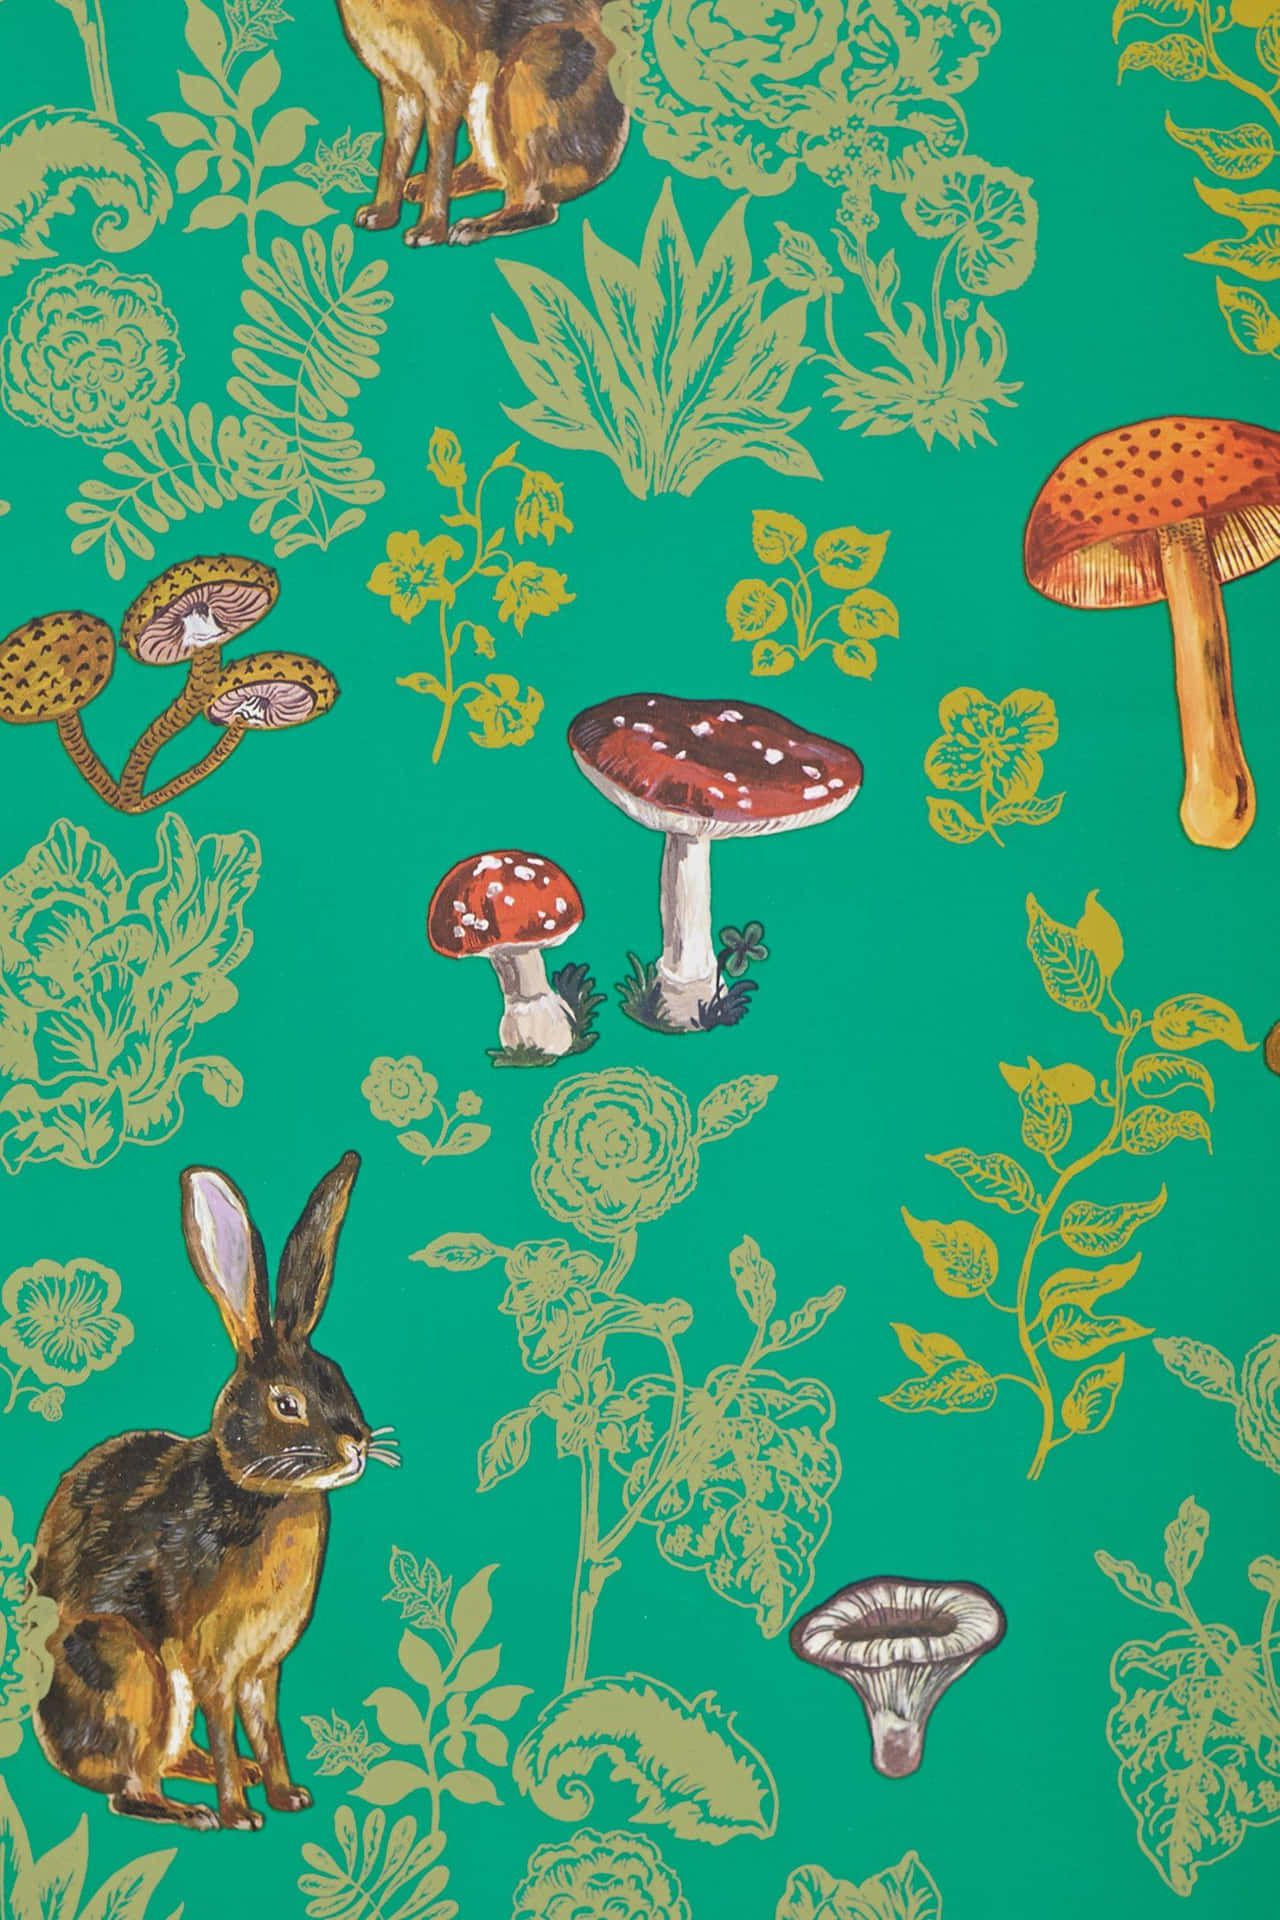 Take your digital life to a brighter level with our fun, awesome Mushroom Phone! Wallpaper